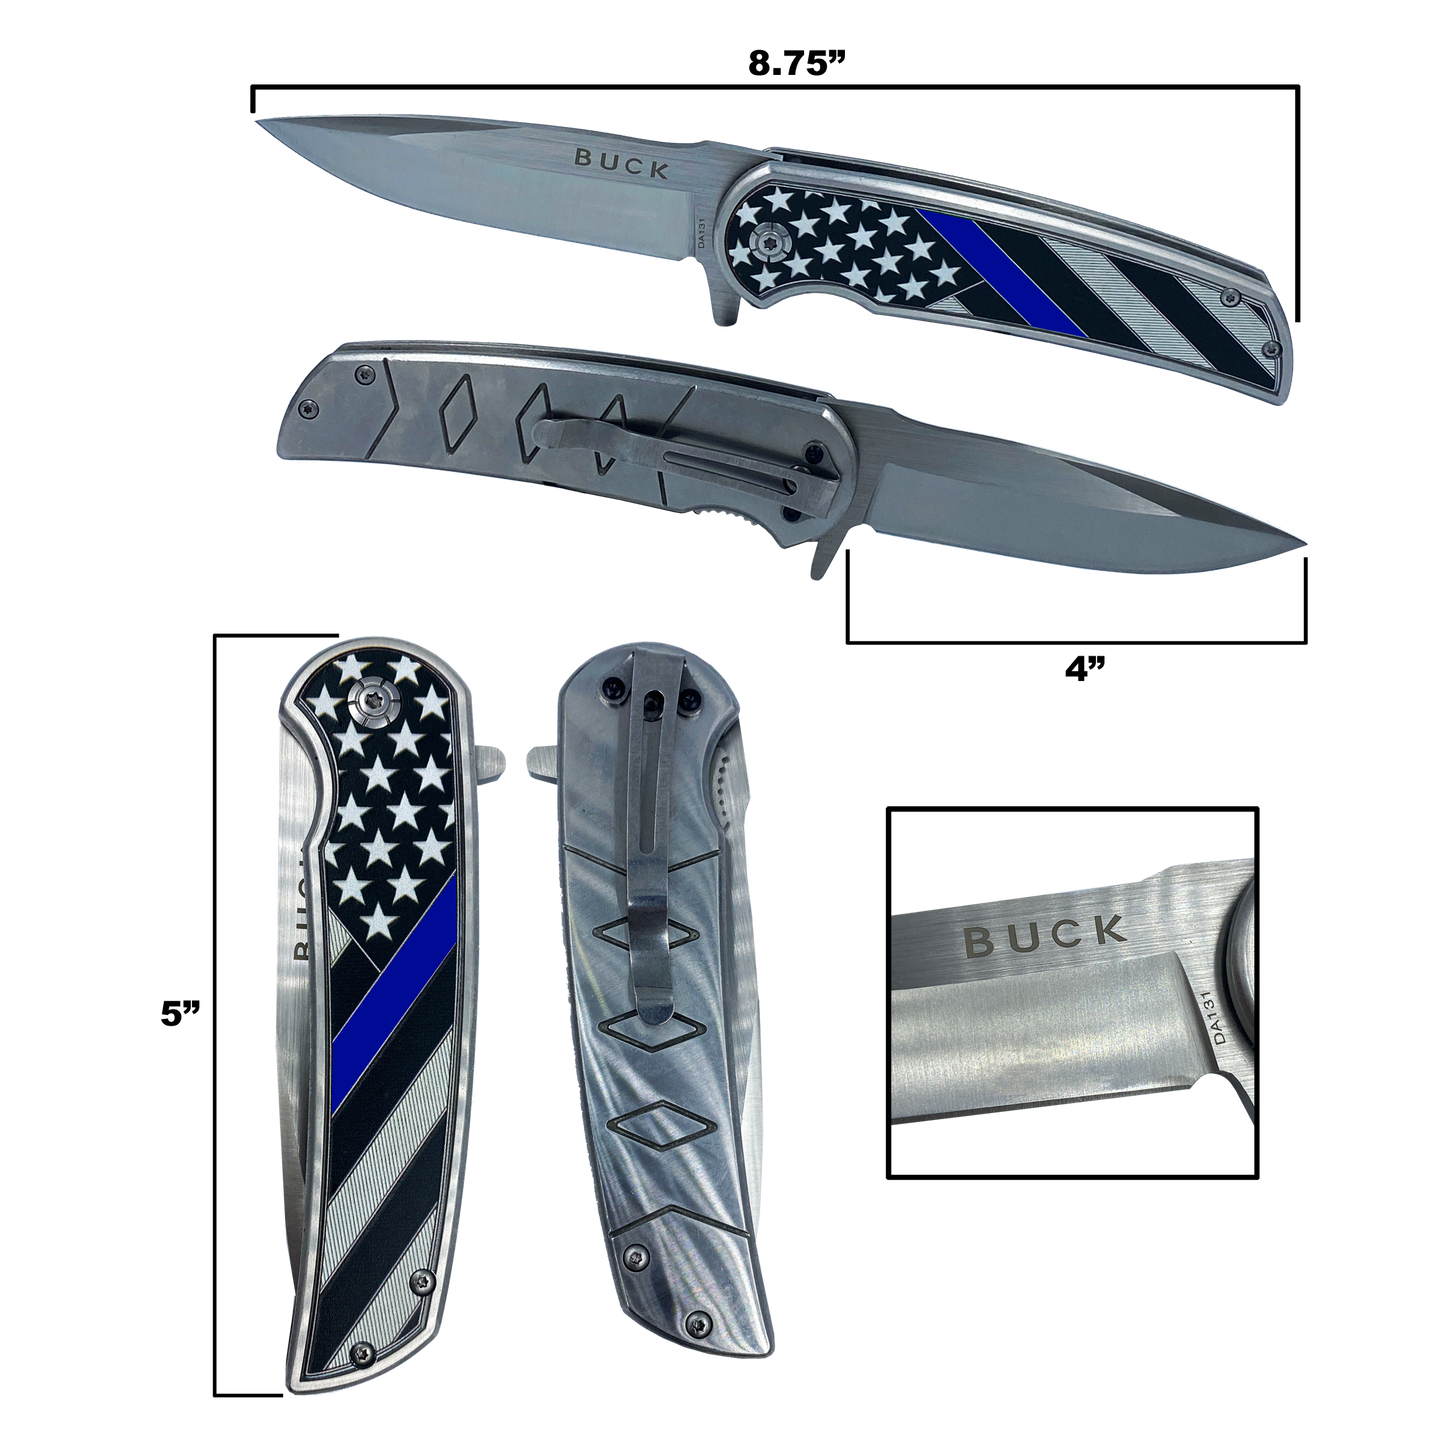 BL1-03 Thin Blue Line pocket tool Police Law Enforcement First Responder Rescue Tactical Survival